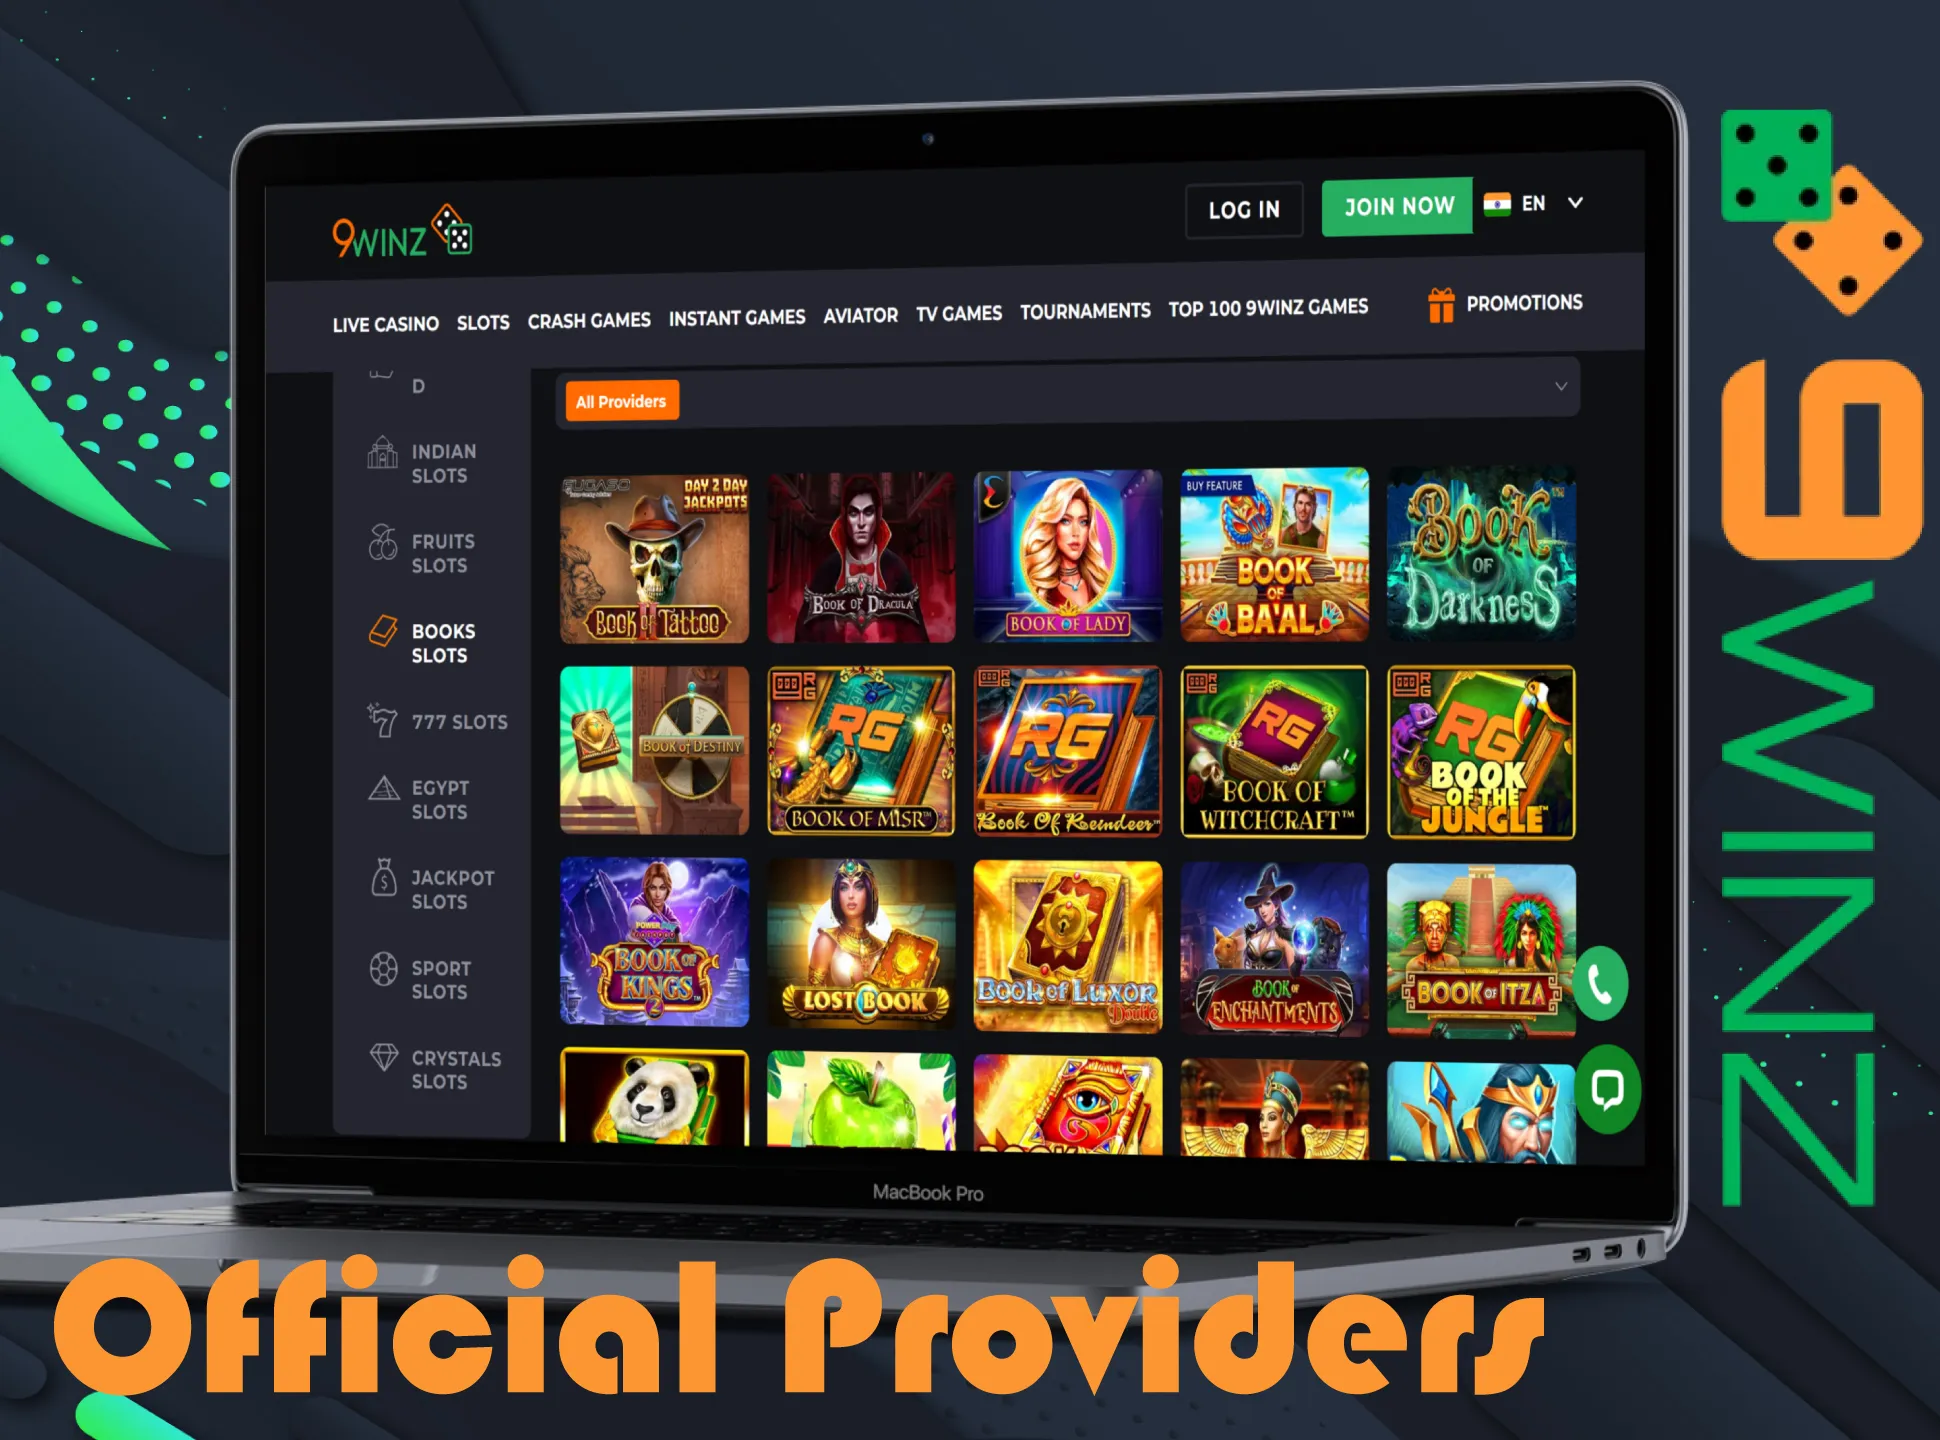 Play games from different providers at 9winz.